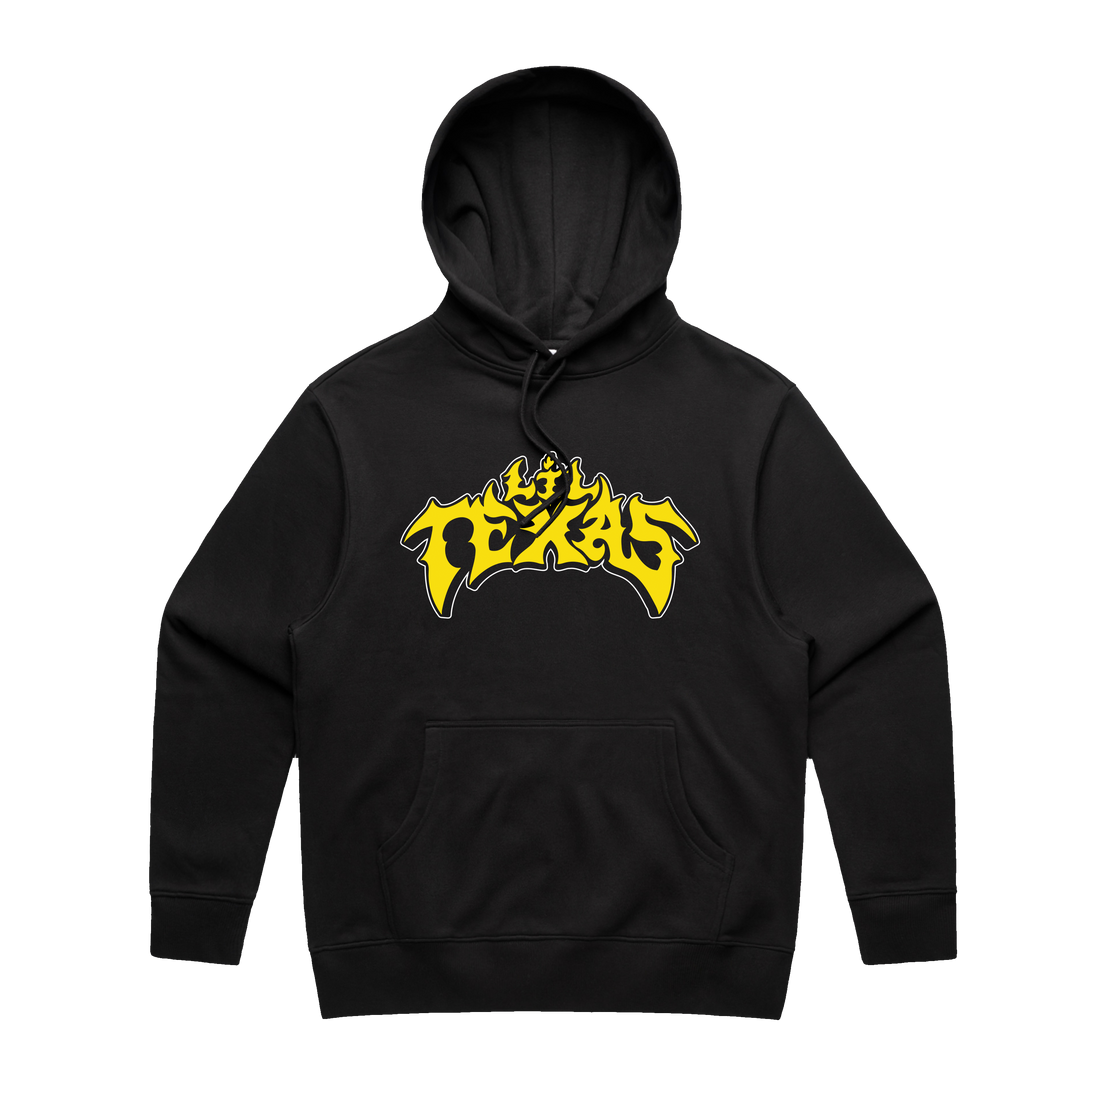 LIL TEXAS - PLANET TEXCORE HOODIE